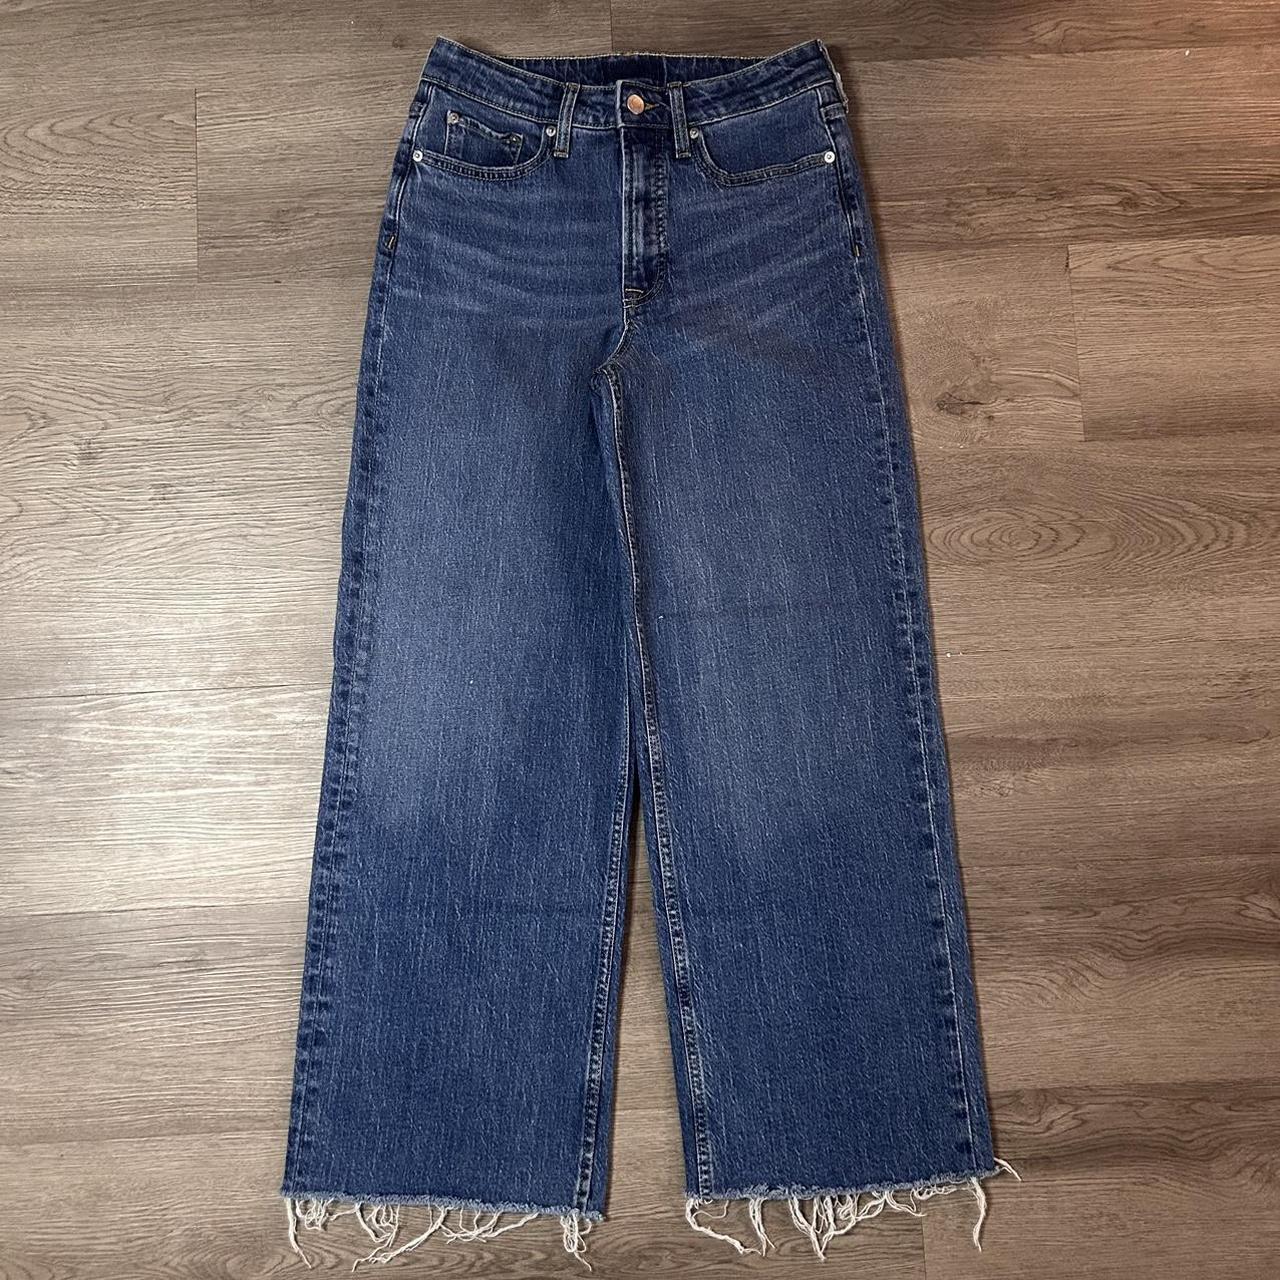 baggy wide leg jeans perfect loose fit without being... - Depop